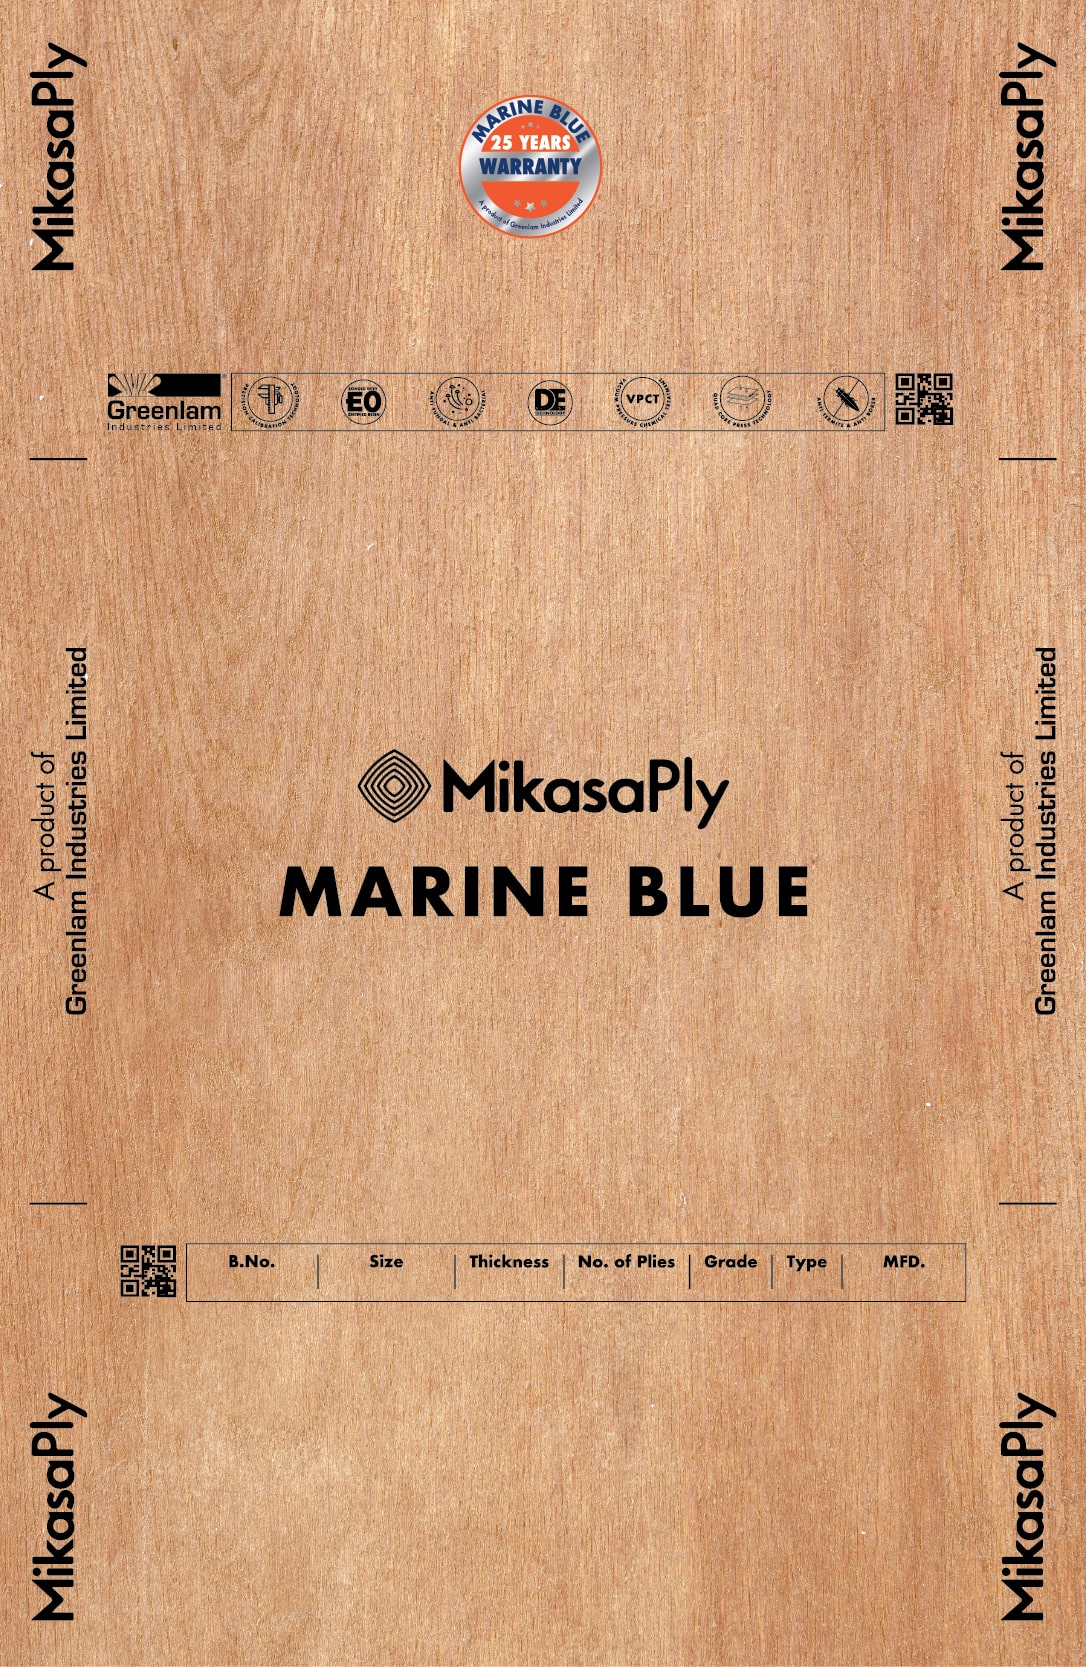 Marine blue ply board by MikasaPly